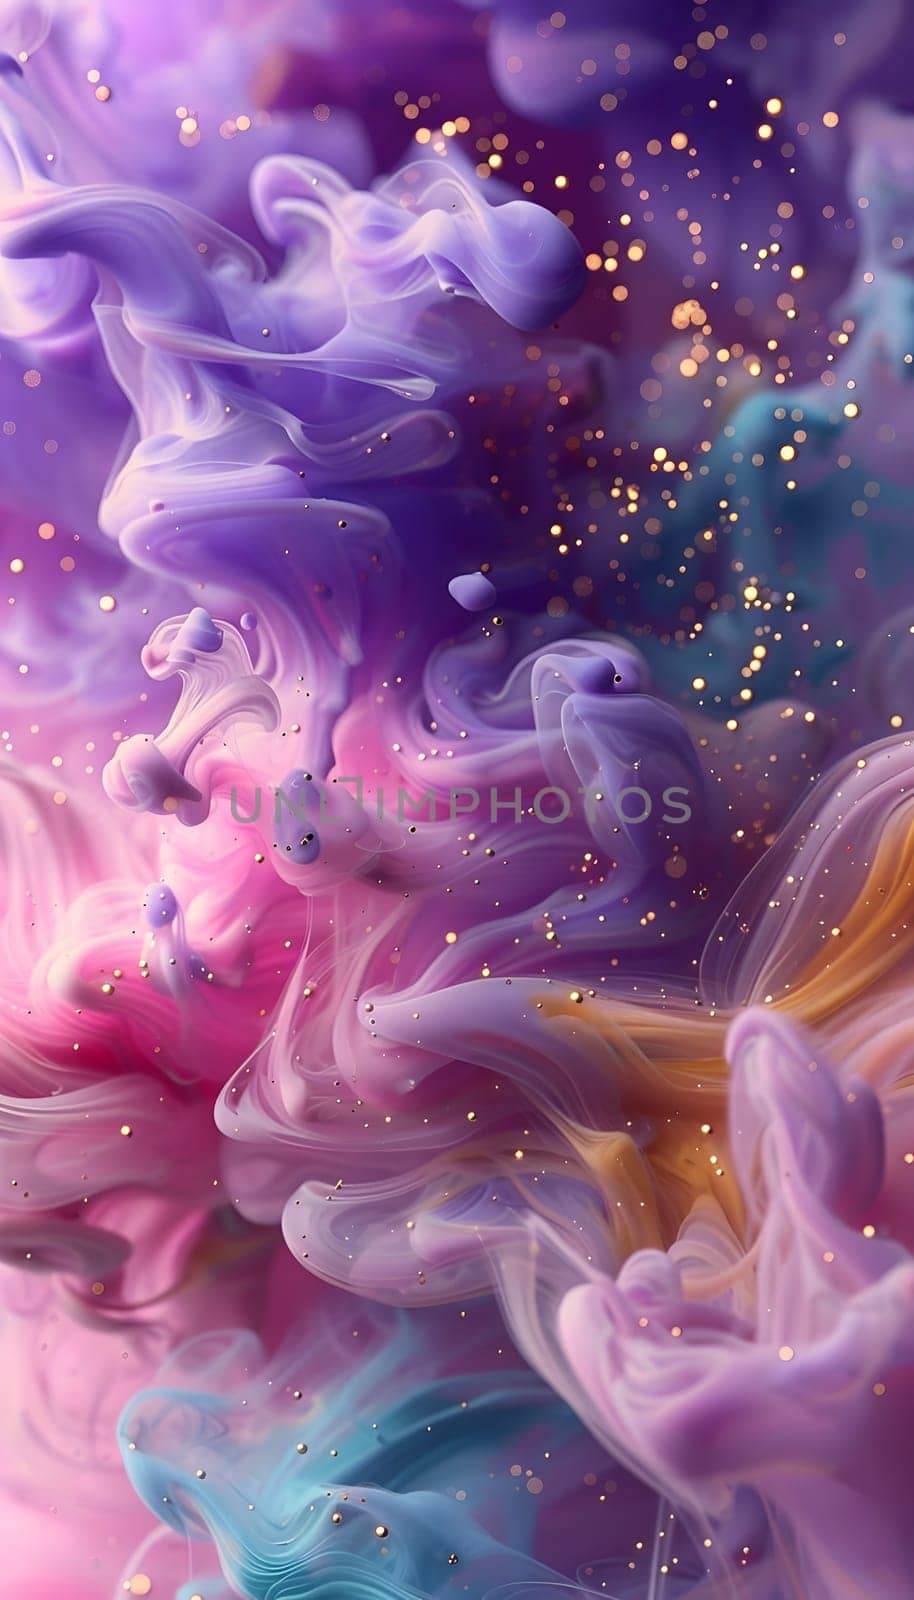 A closeup of swirling purple, pink, and electric blue smoke with shimmering gold sparkles, resembling a vibrant floral art piece with a magenta and violet petal pattern